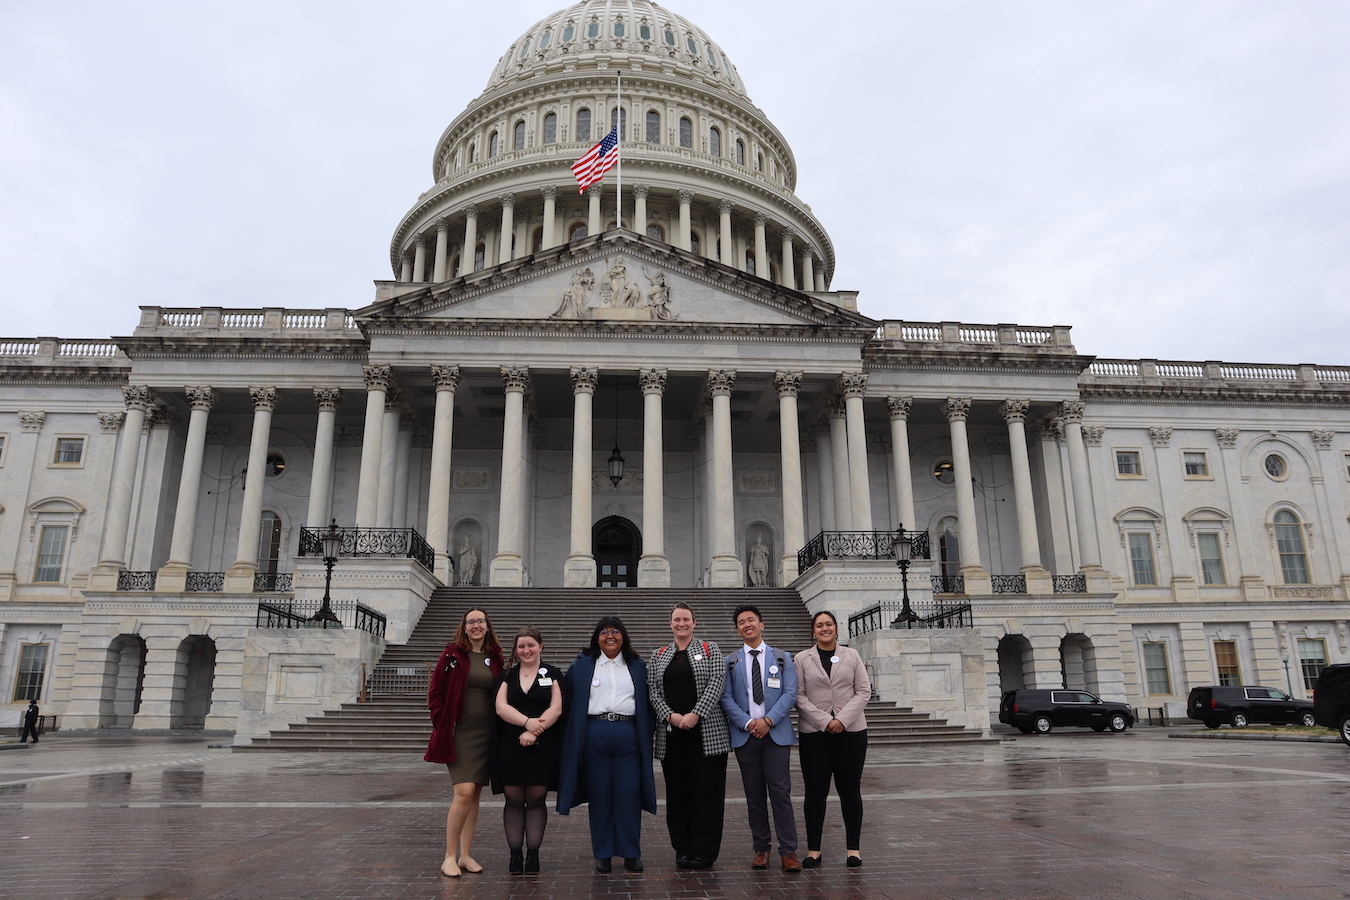 A group shot of employees in front of the U.S. Capitol